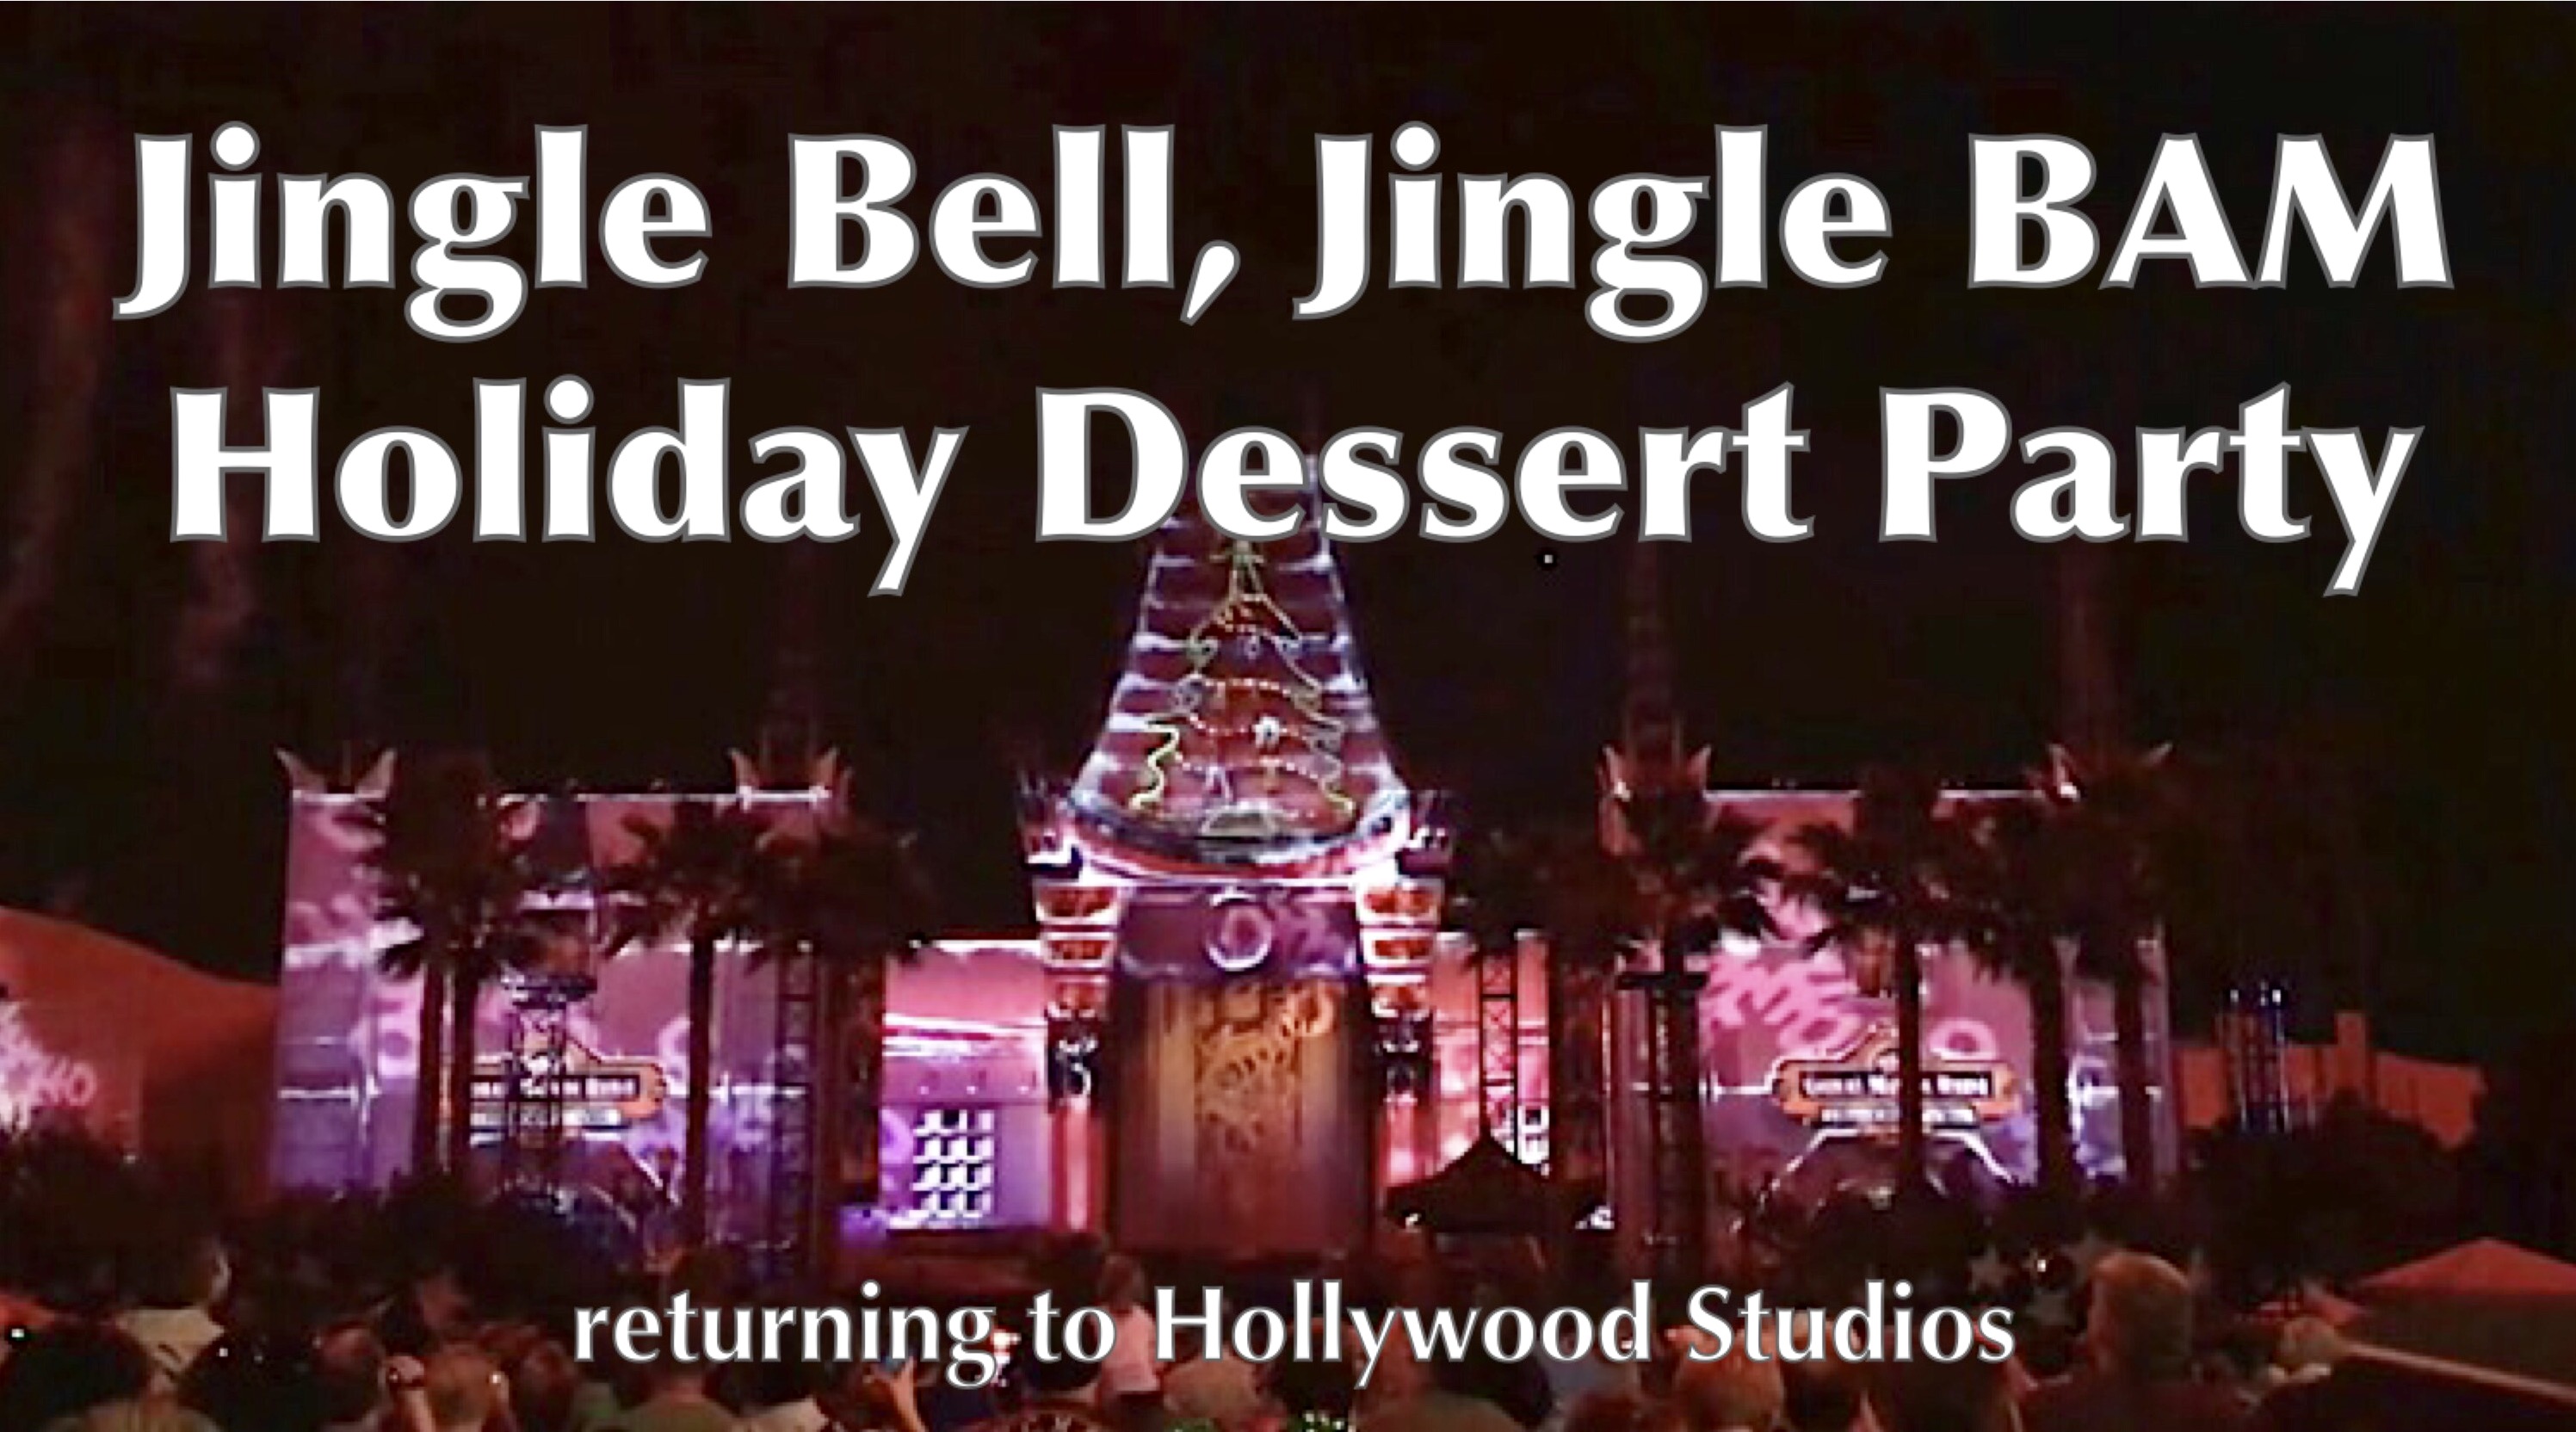 Jingle Bell Jingle BAM Holiday Dessert Party returning to Hollywood Studios